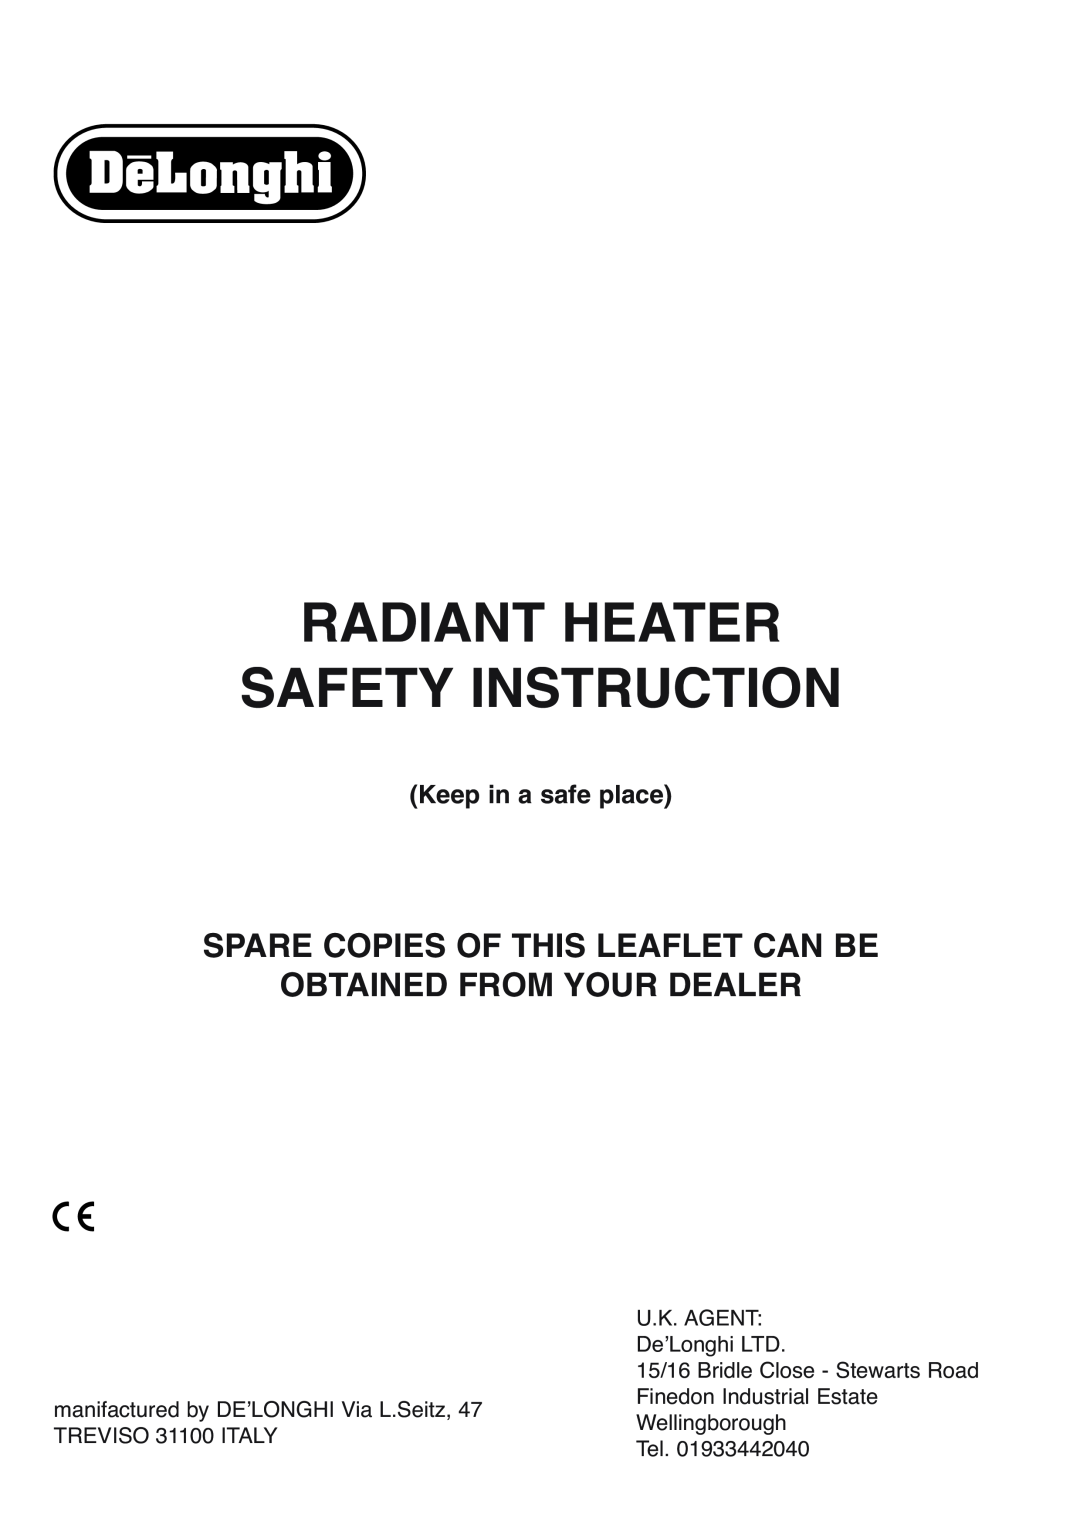 DeLonghi 634H, 634R manual Keep in a safe place, 15/16 Bridle Close - Stewarts Road, Radiant Heater Safety Instruction 